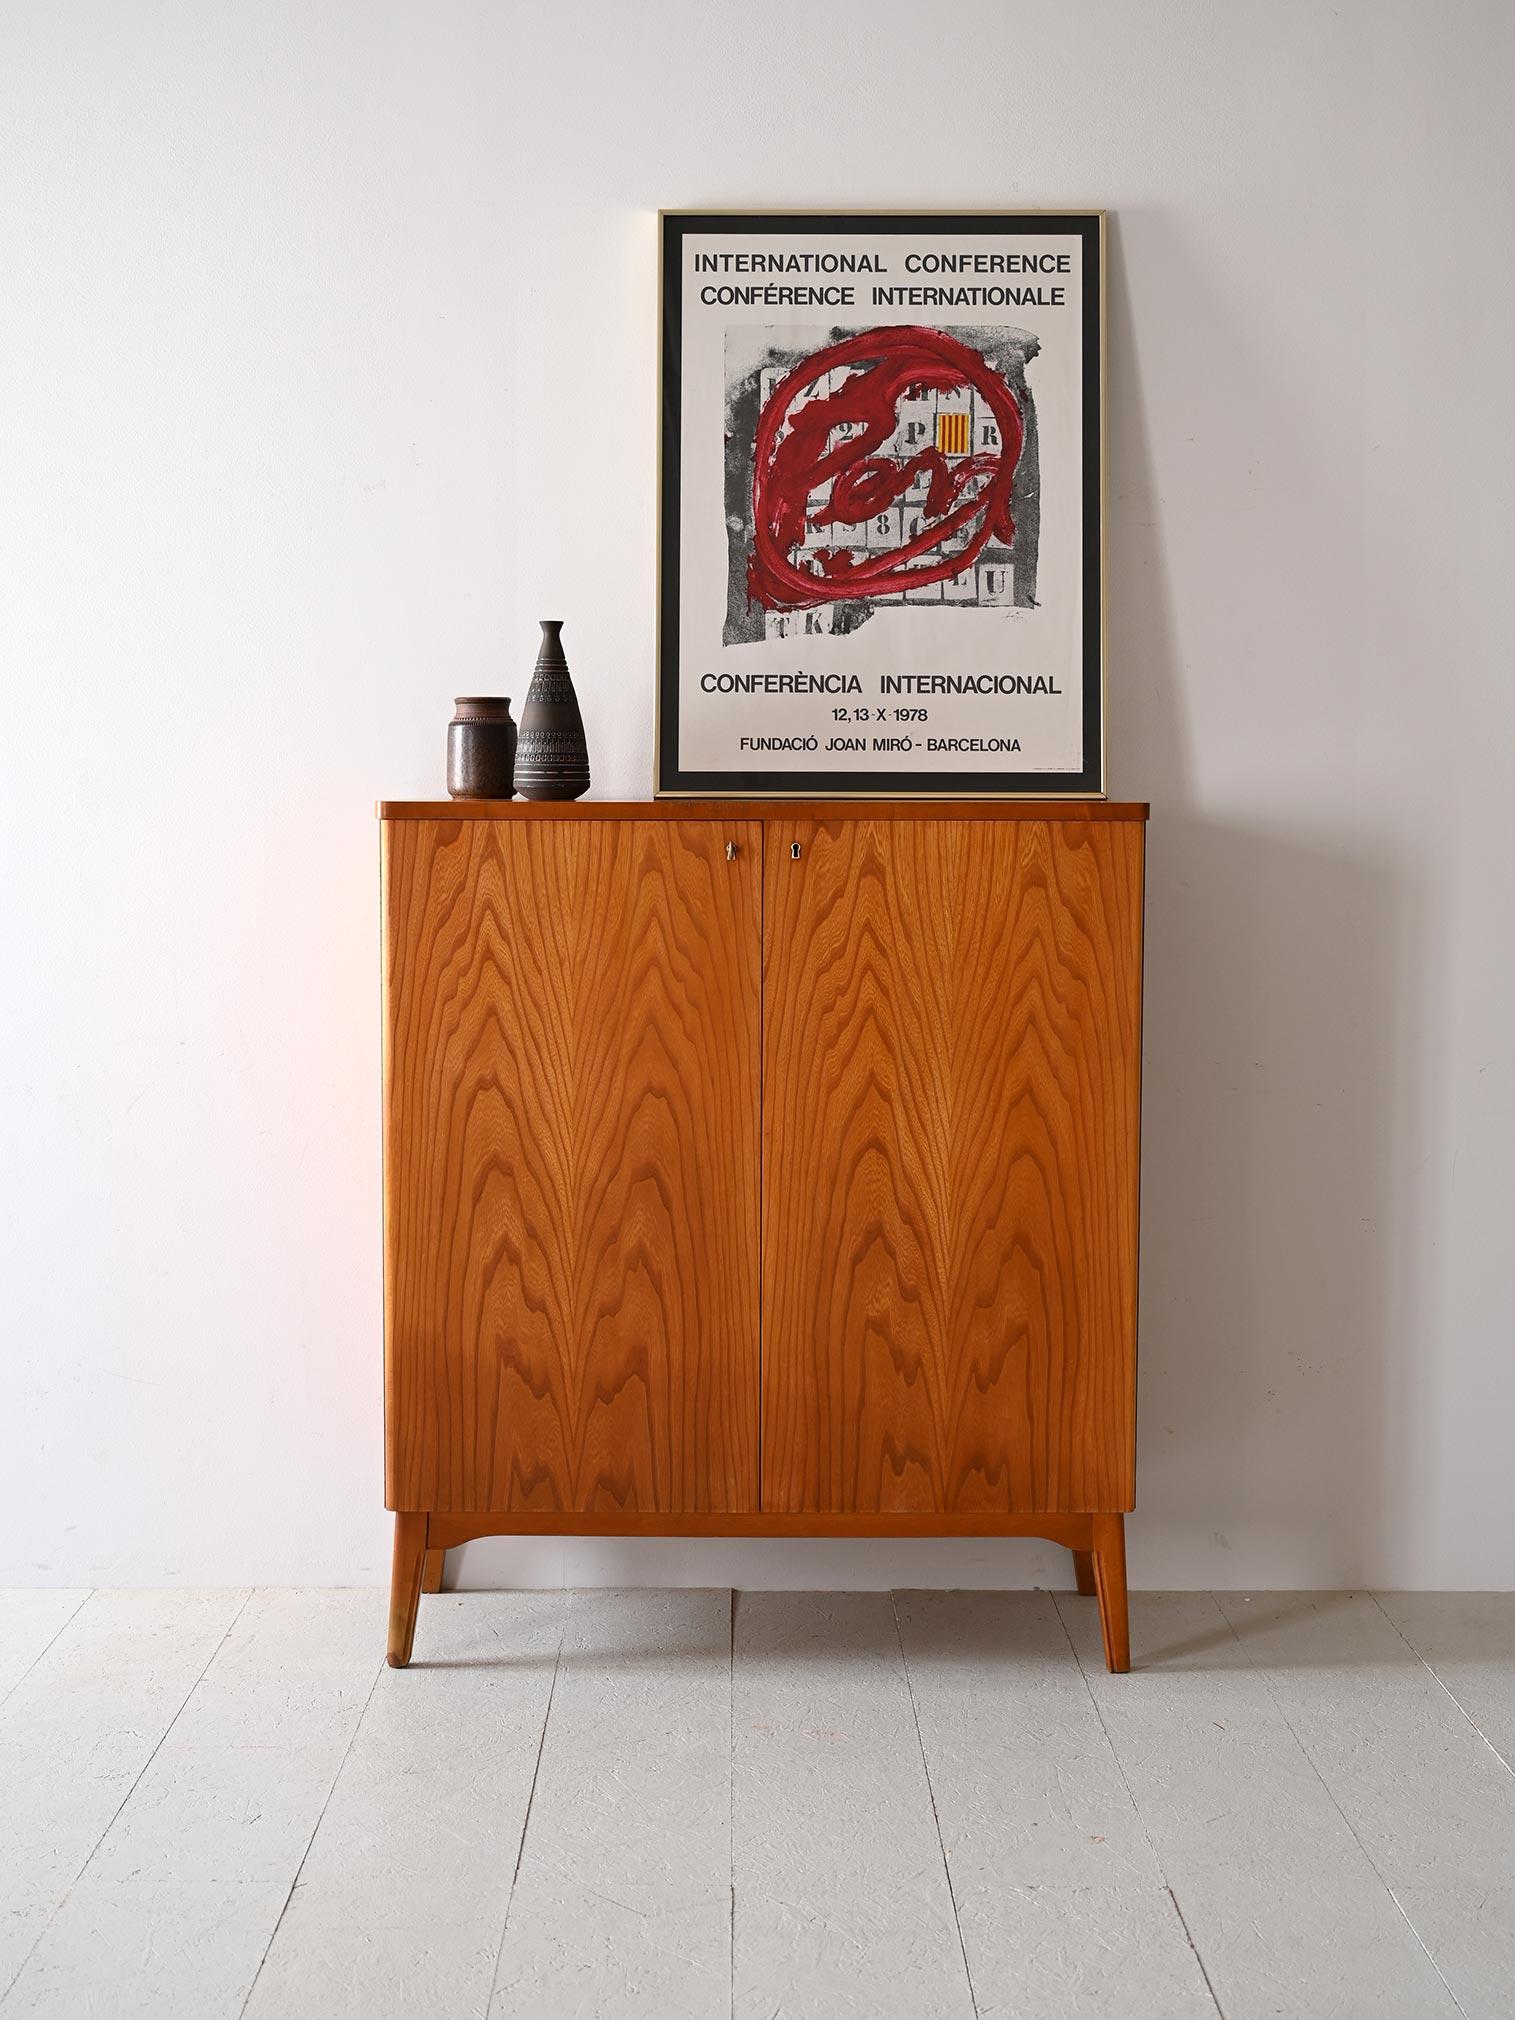 Cabinet from the 1950s  with hinged doors.

Externally, the structure is modern and minimalist with two lockable hinged doors. Inside there are four drawers and several shelves that divide the space.
The manufacture shows the typical linearity of